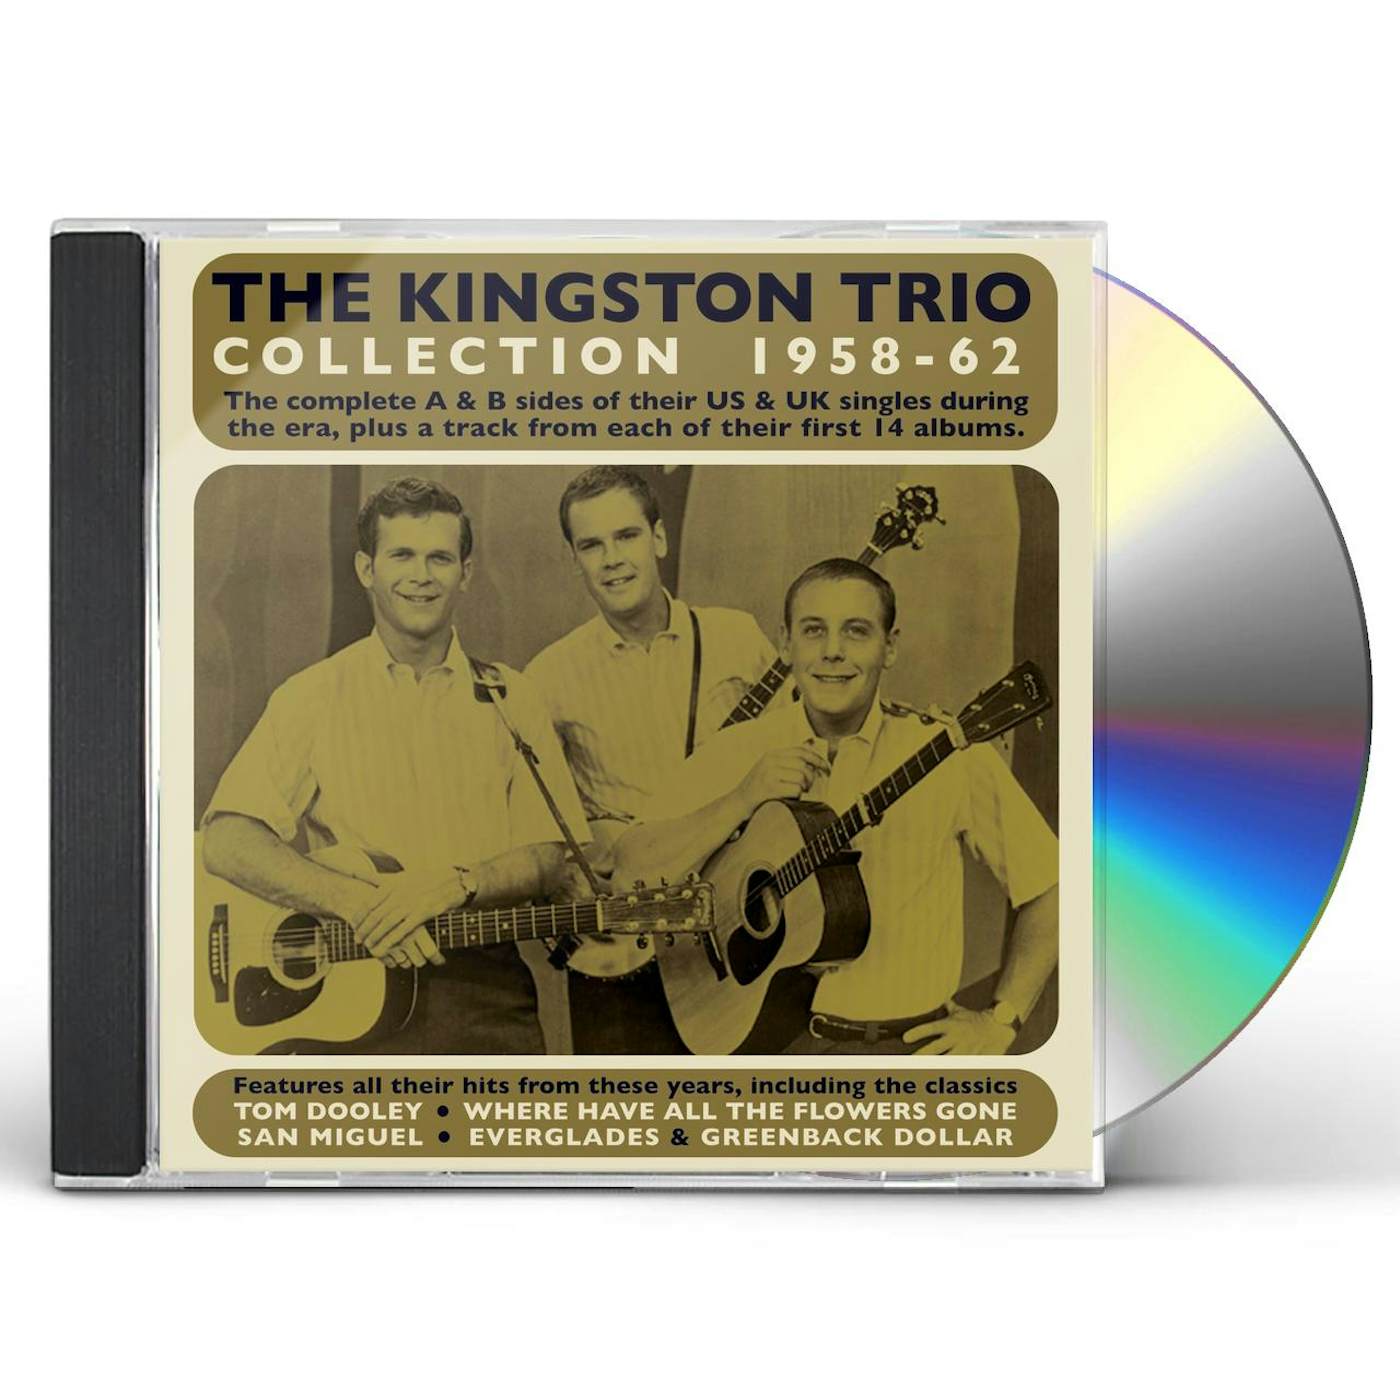 The Kingston Trio COLLECTION 1958-62 CD